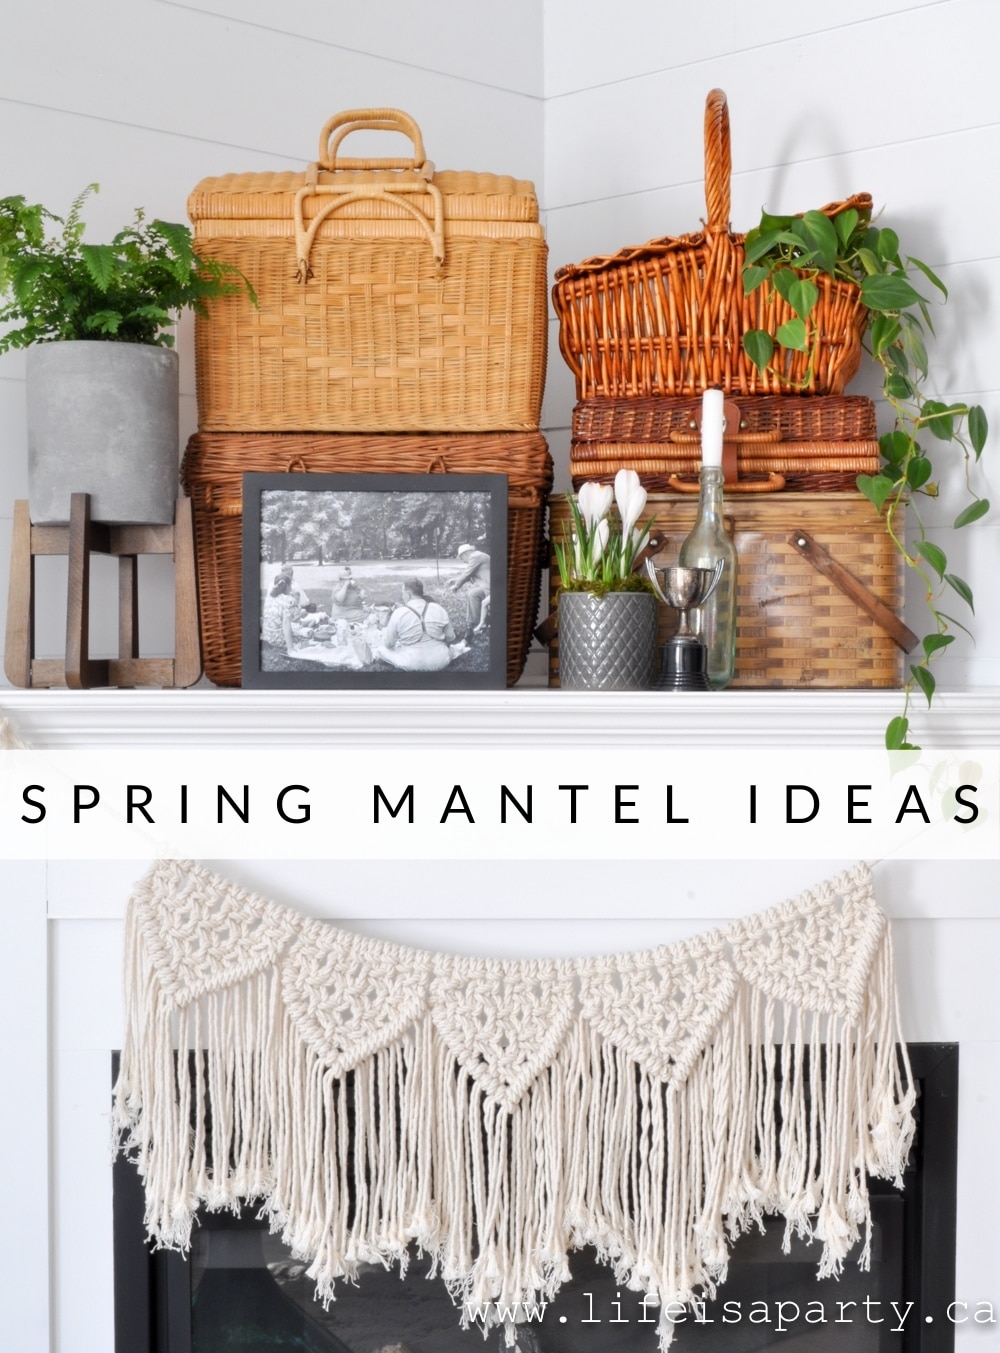 Spring Mantel Ideas: inspired by spring picnics this mantel is decorated with vintage picnic baskets, and picnic art.